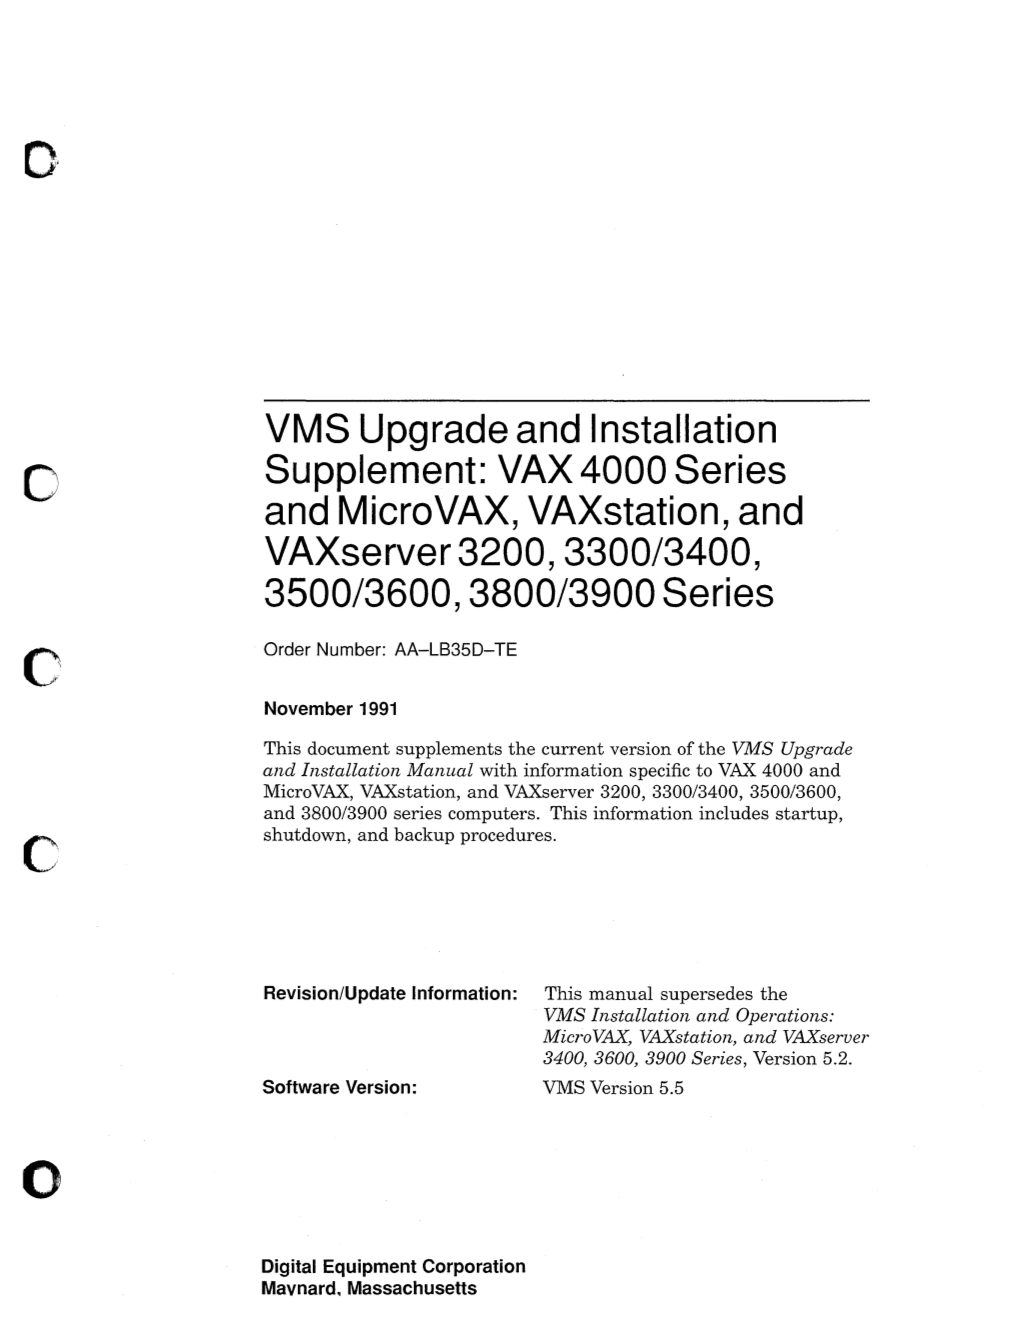 VMS Upgrade and Installation Supplement: VAX 4000 Series and Microvax, Vaxstation, and Vaxserver 3200, 3300/3400, 3500/3600, 3800/3900 Series AA-LB35D-TE